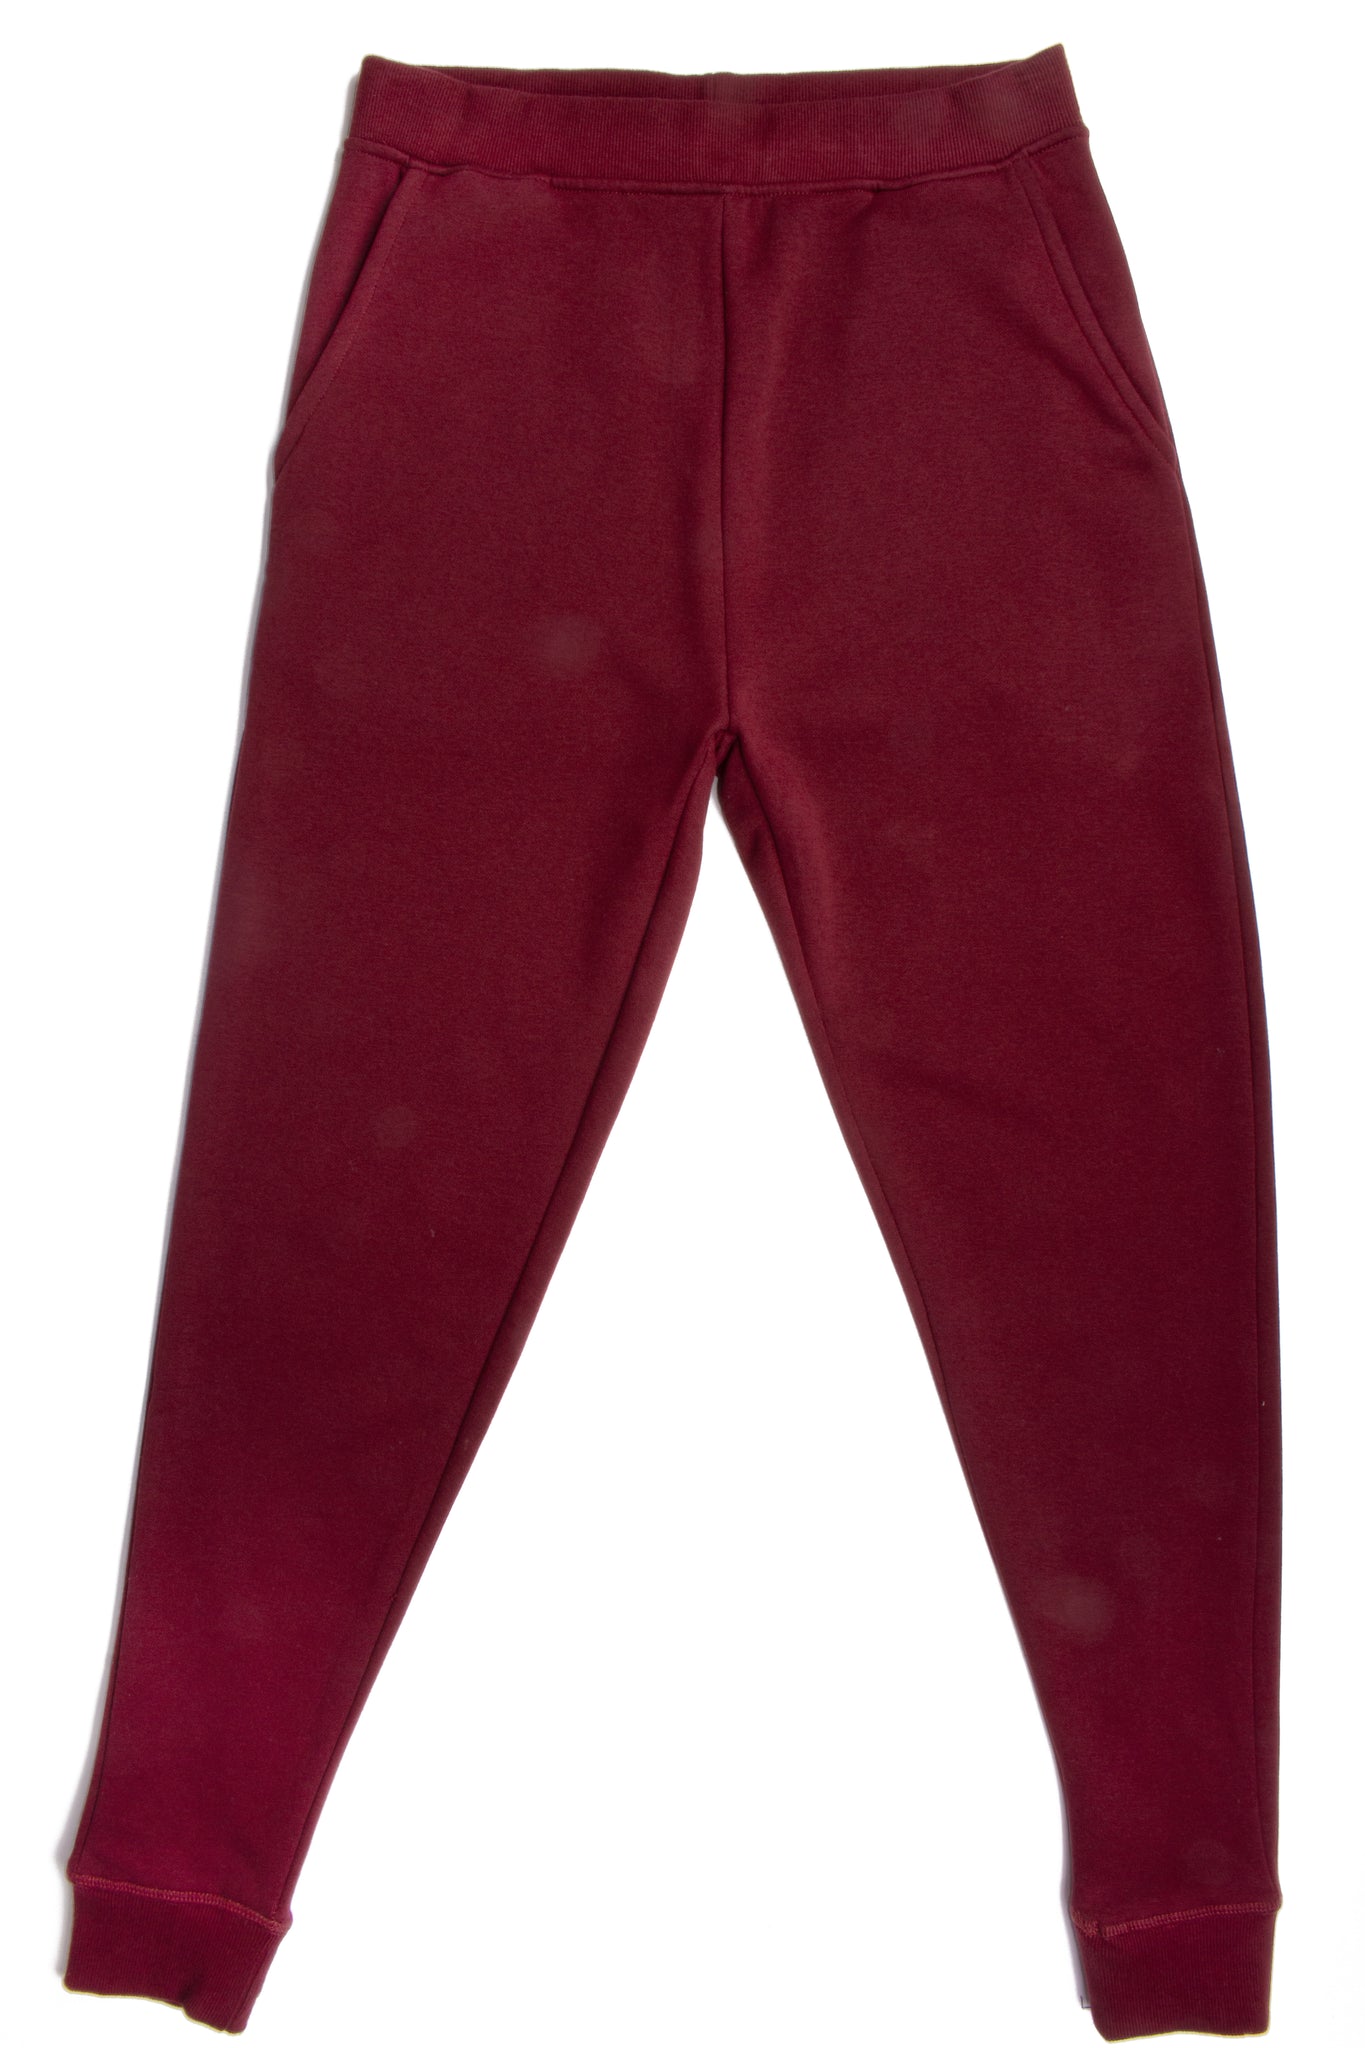 HERO-5020R Unisex Joggers - Maroon (Relaxed Fit)